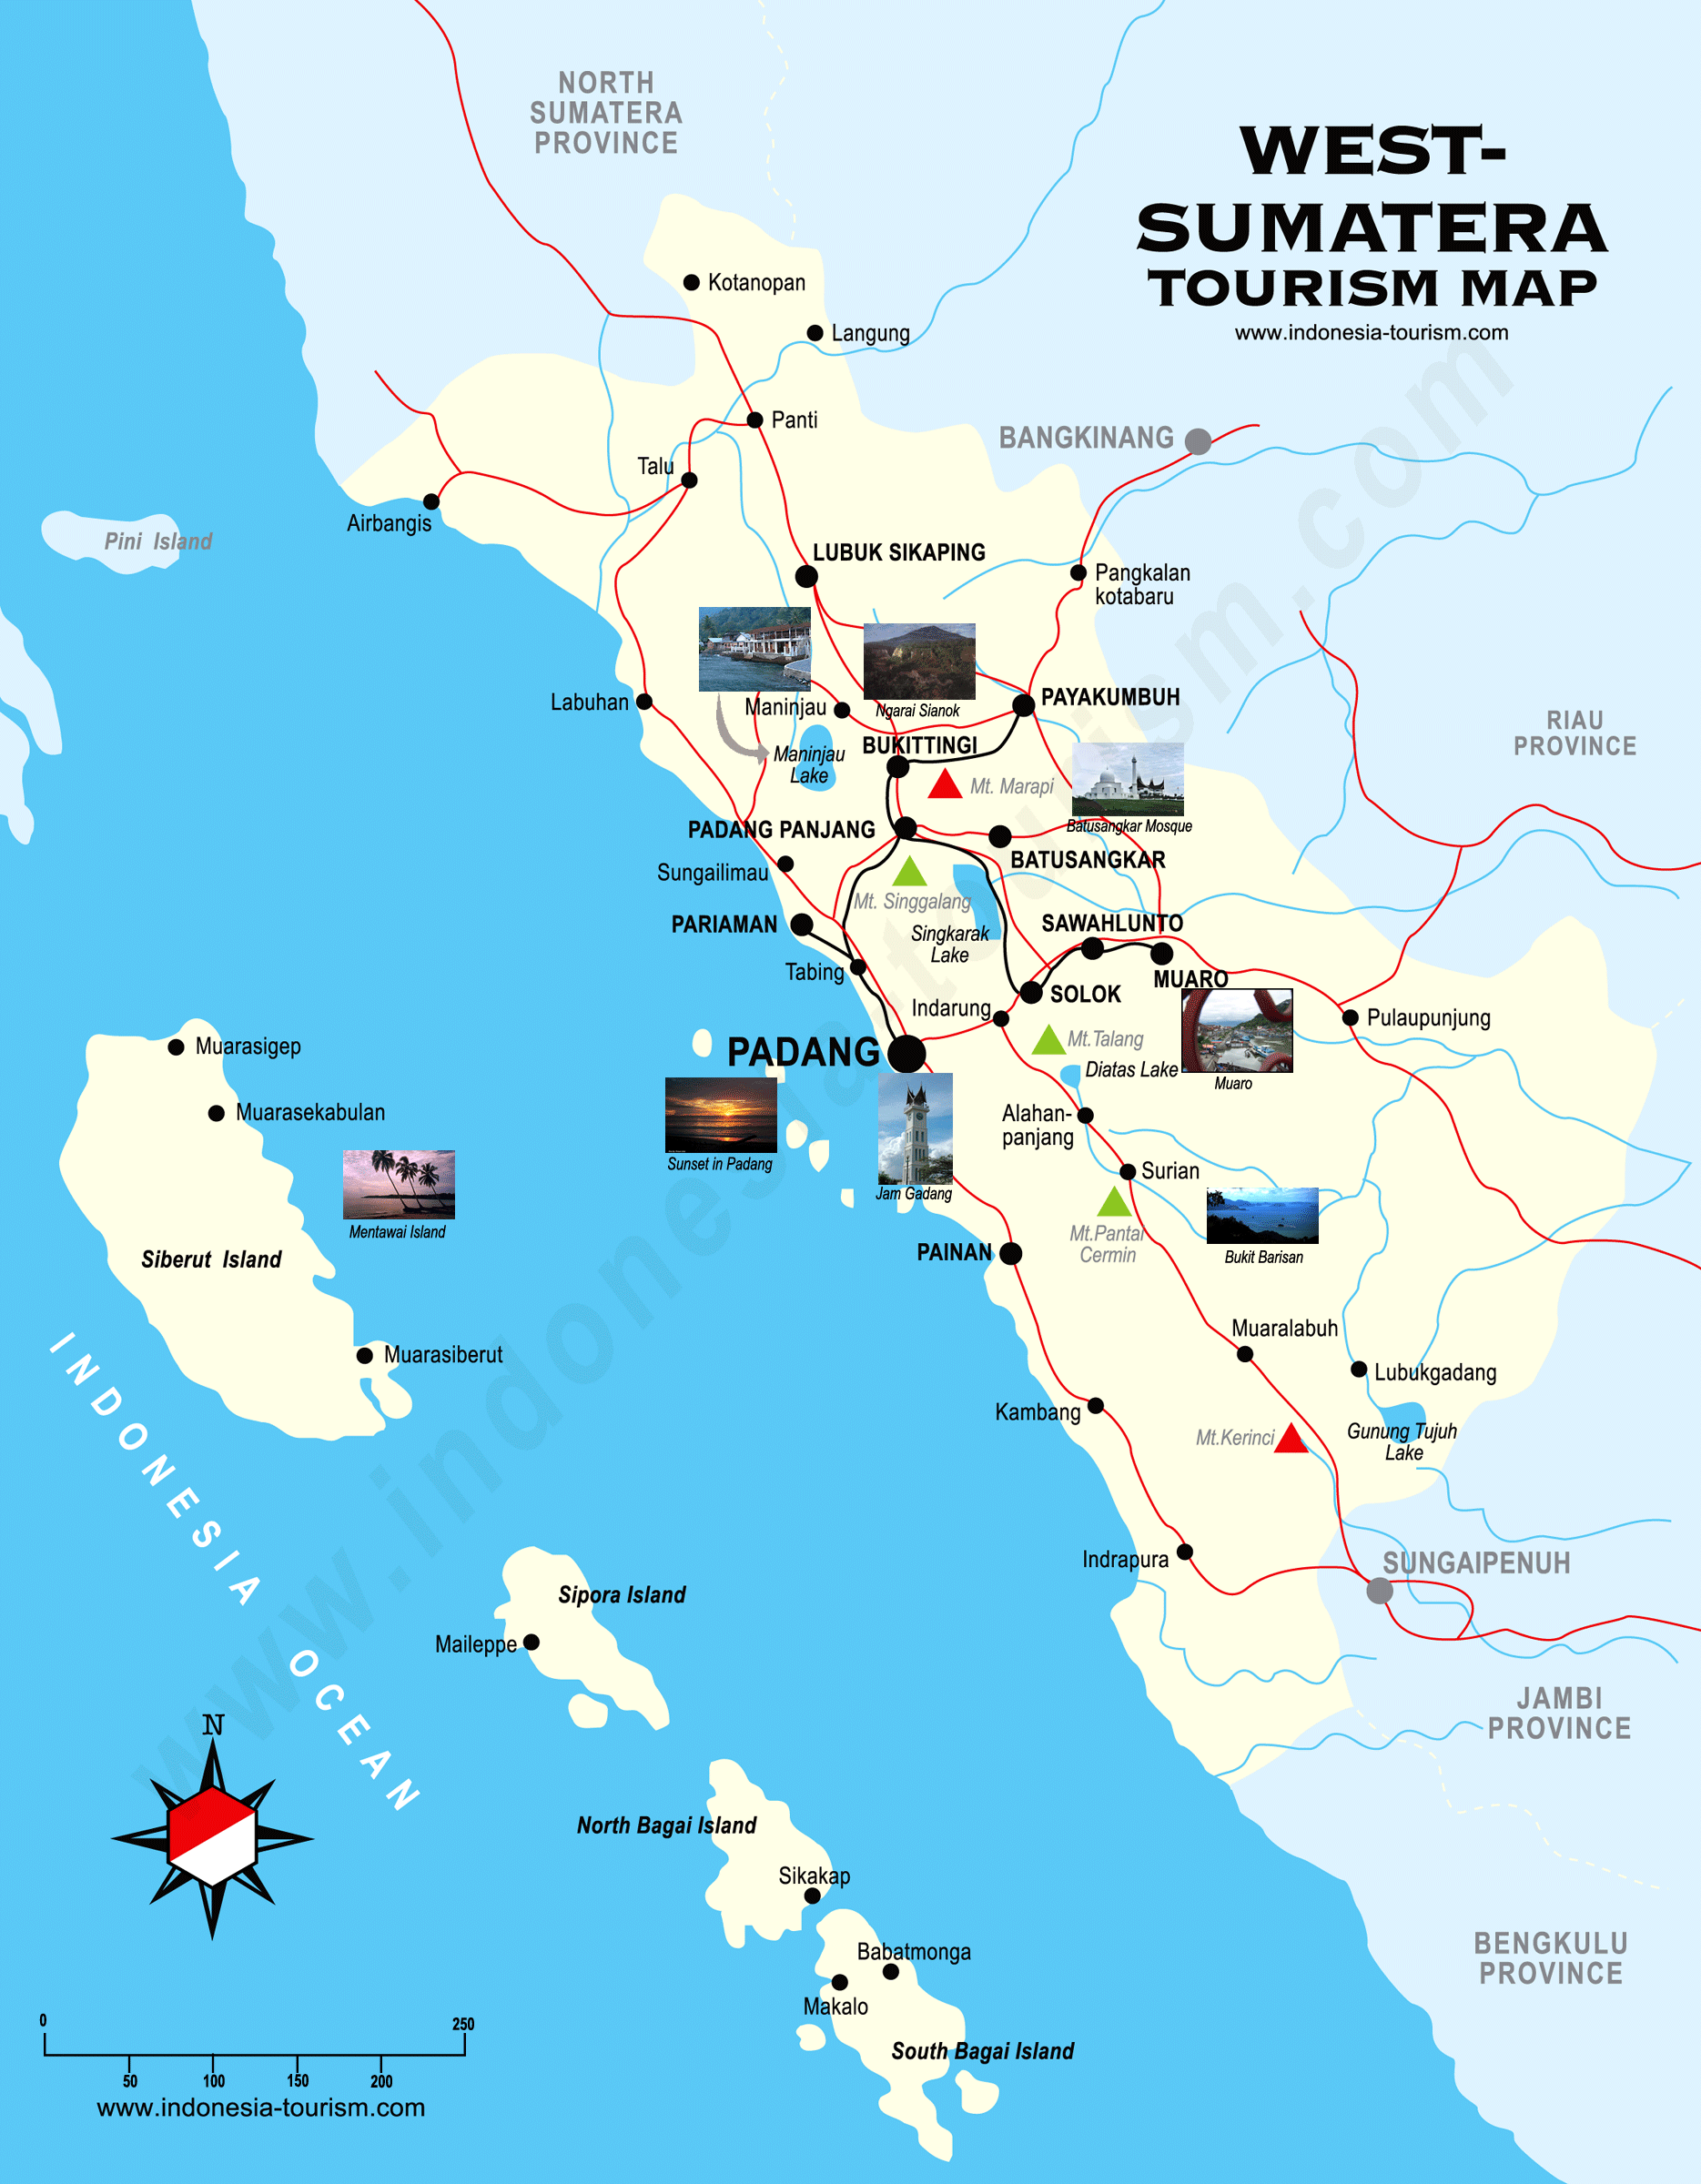 Download this West Sumatra Tourism Map picture